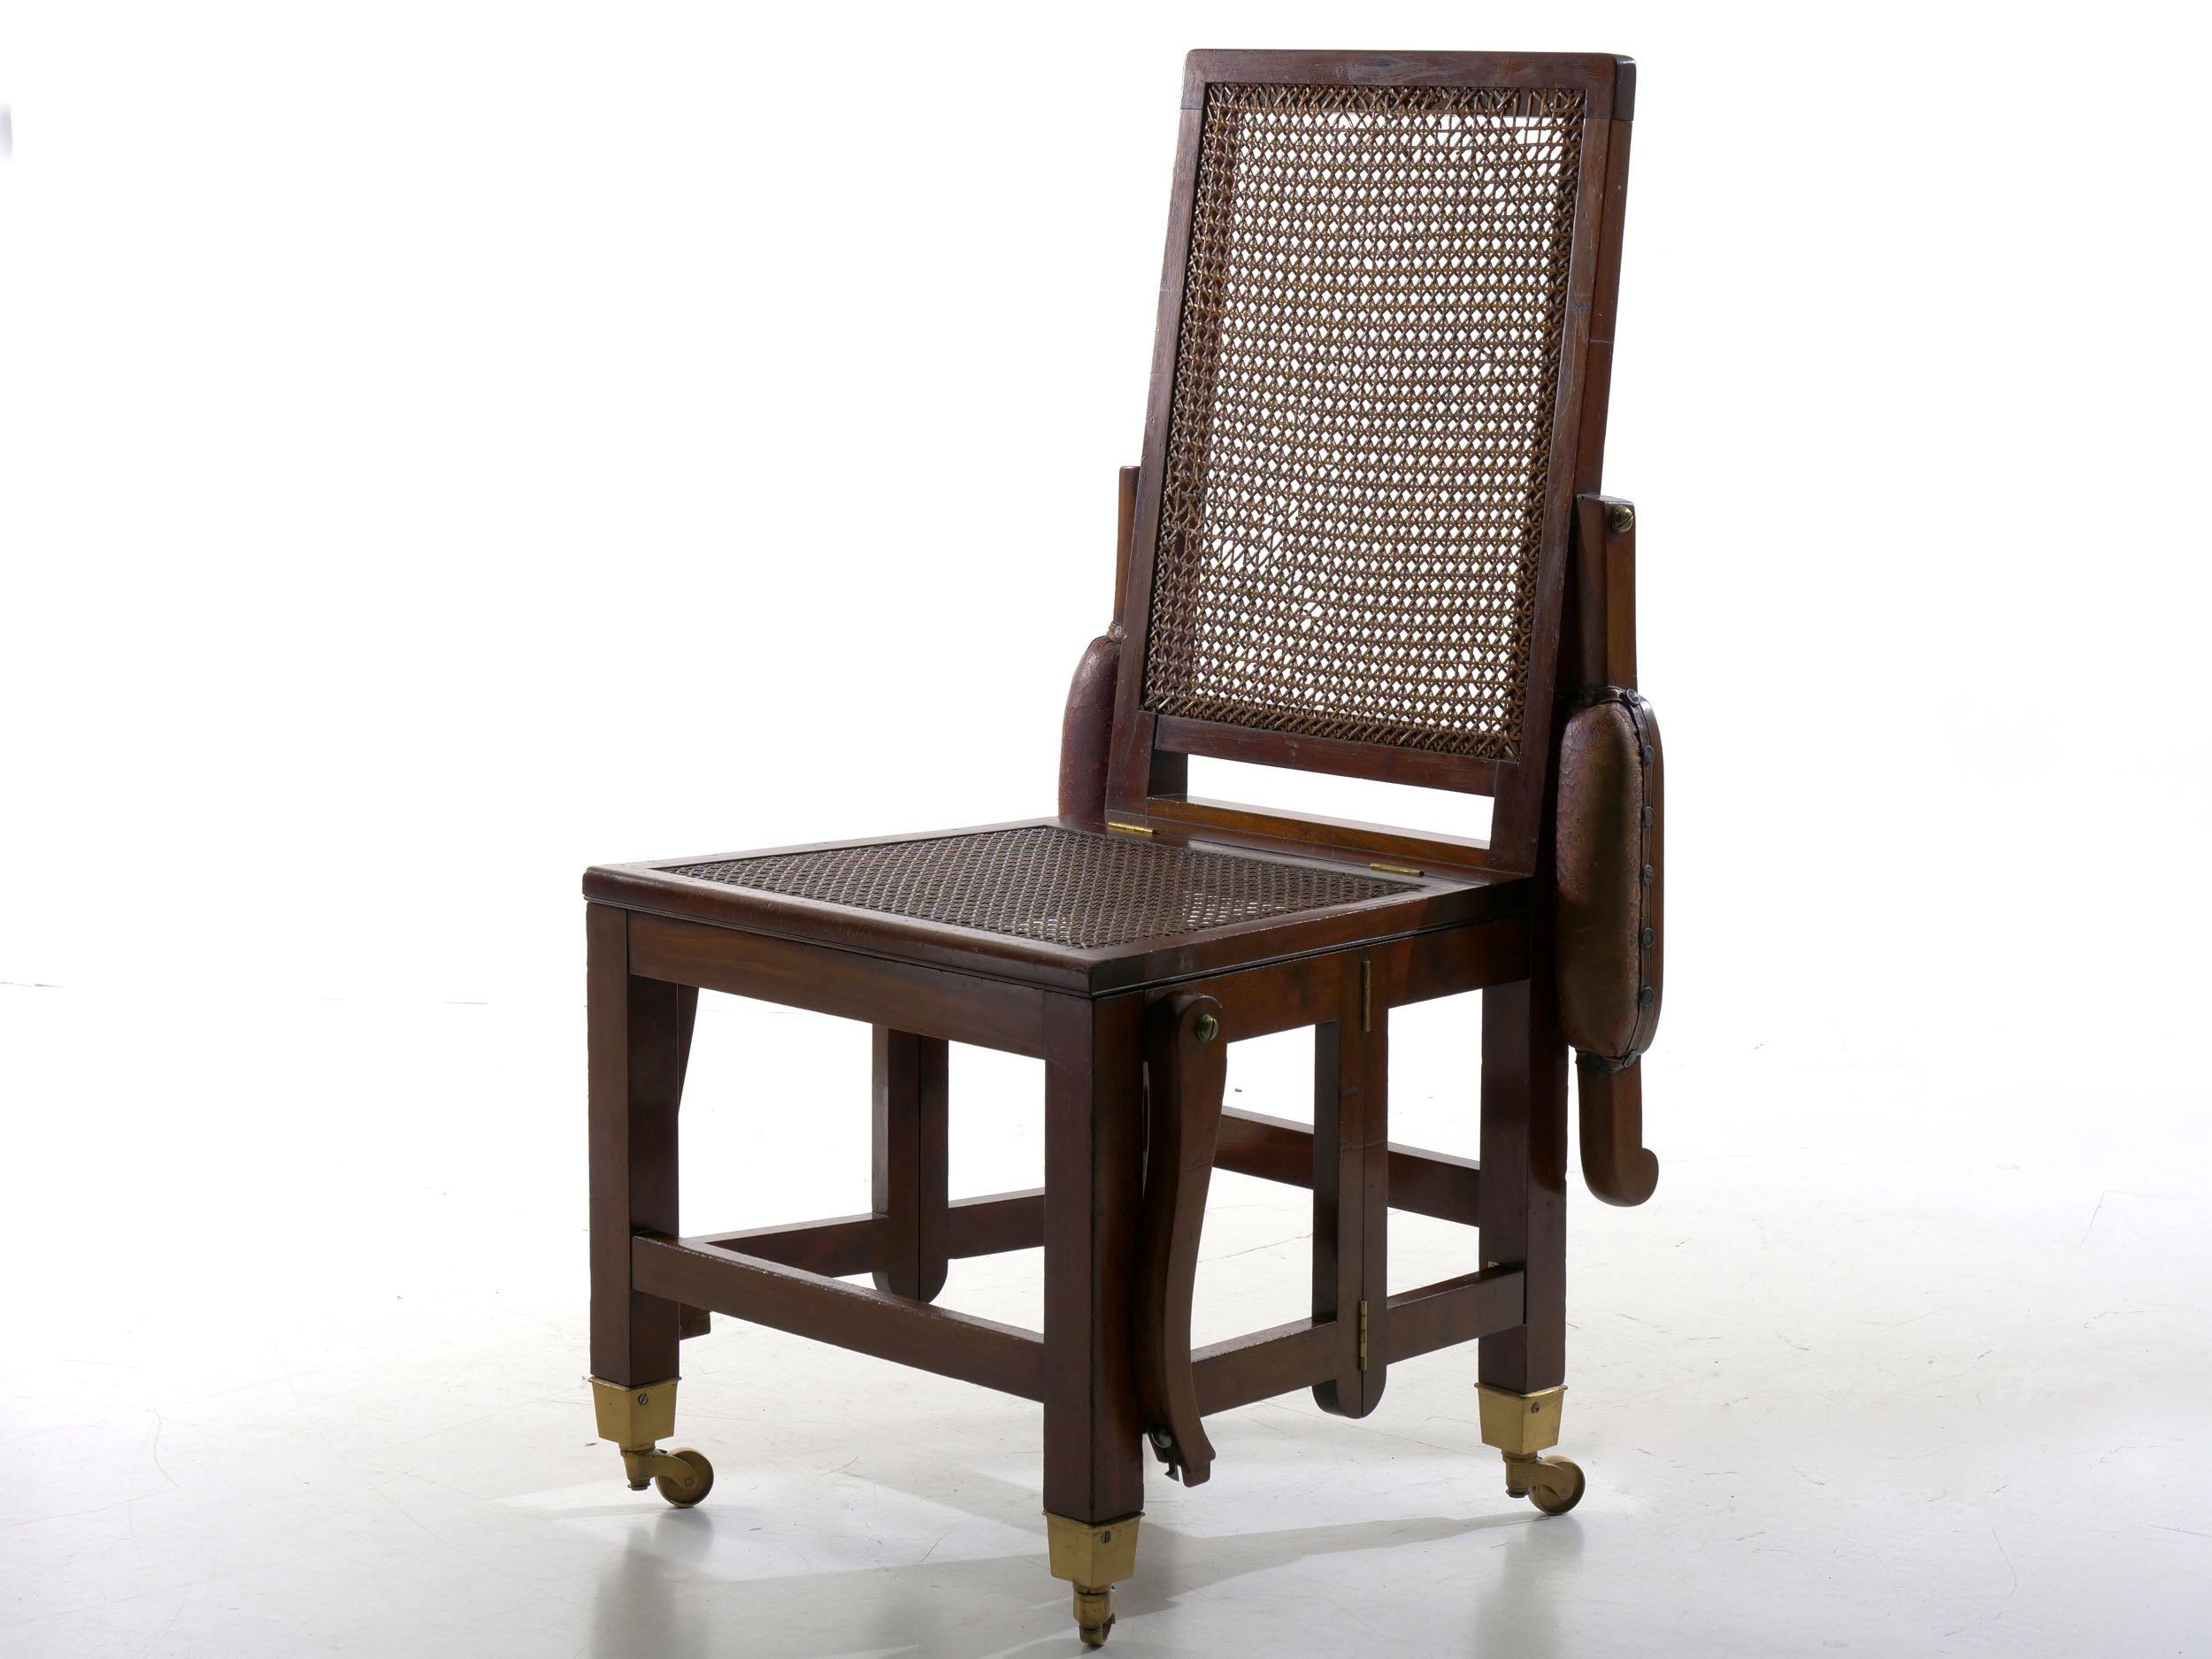 A RARE VICTORIAN CAMPAIGN MAHOGANY AND LEATHER METAMORPHIC ARMCHAIR
England, circa 1840-60; seat stamped 